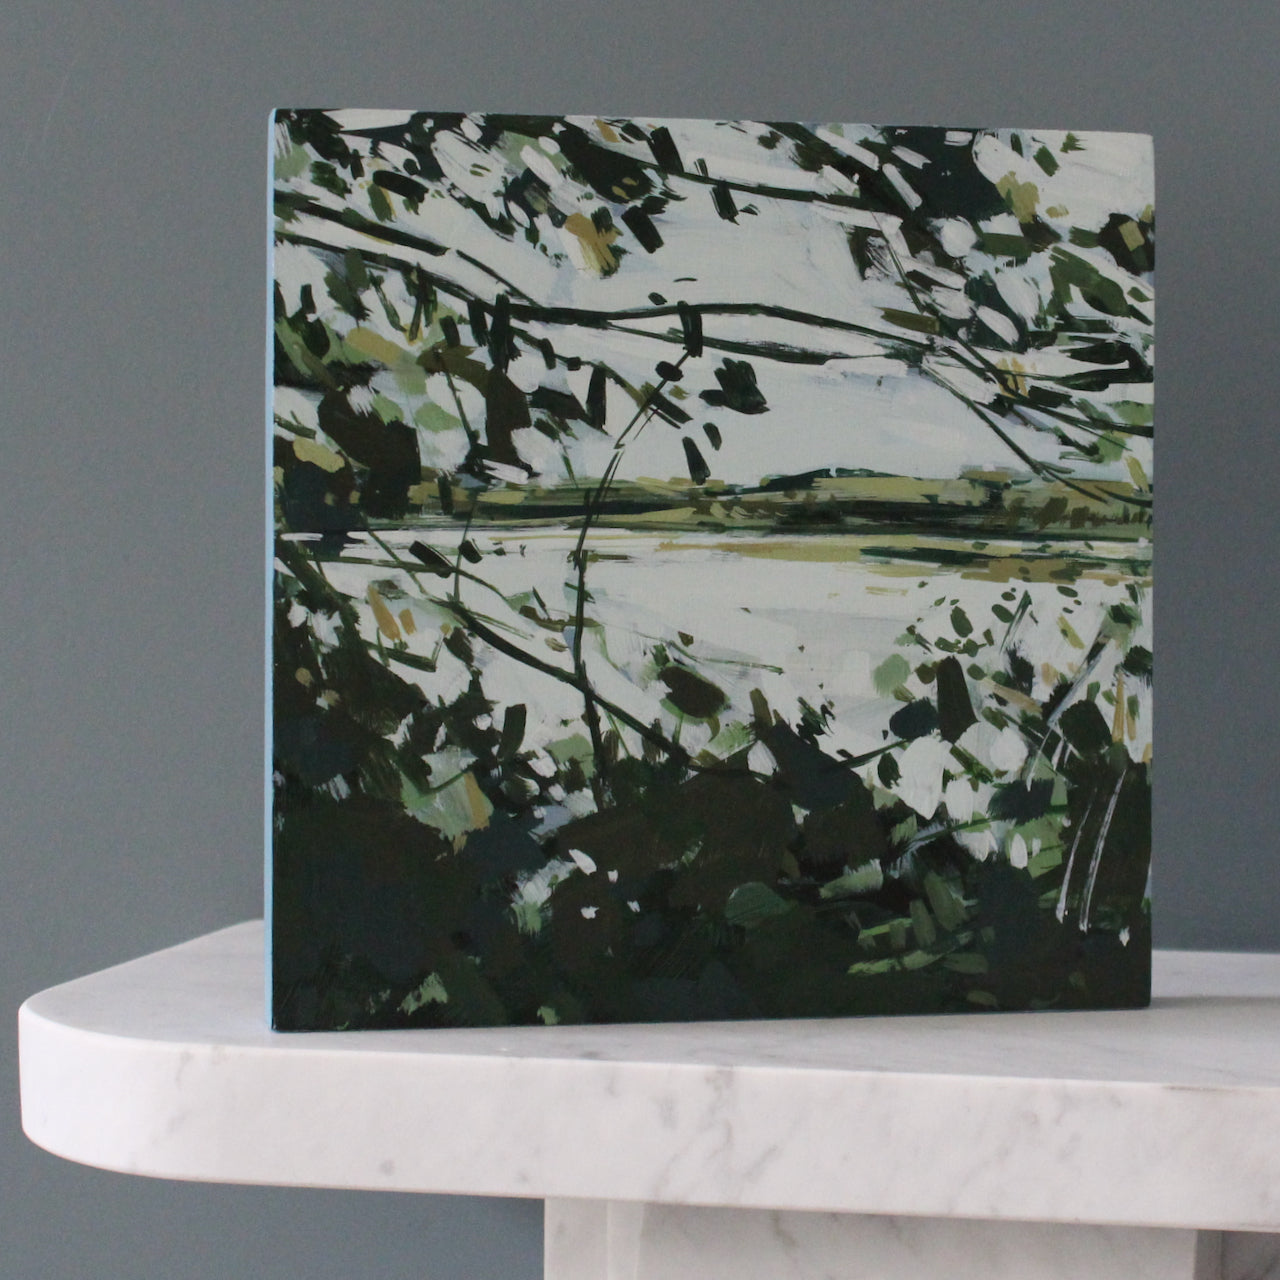 Imogen Bone painting looking through leaves and branches of a tree to a pale river with soft green fields on the other side, the painting is standing on a marble mantle piece in front of a grey wall.